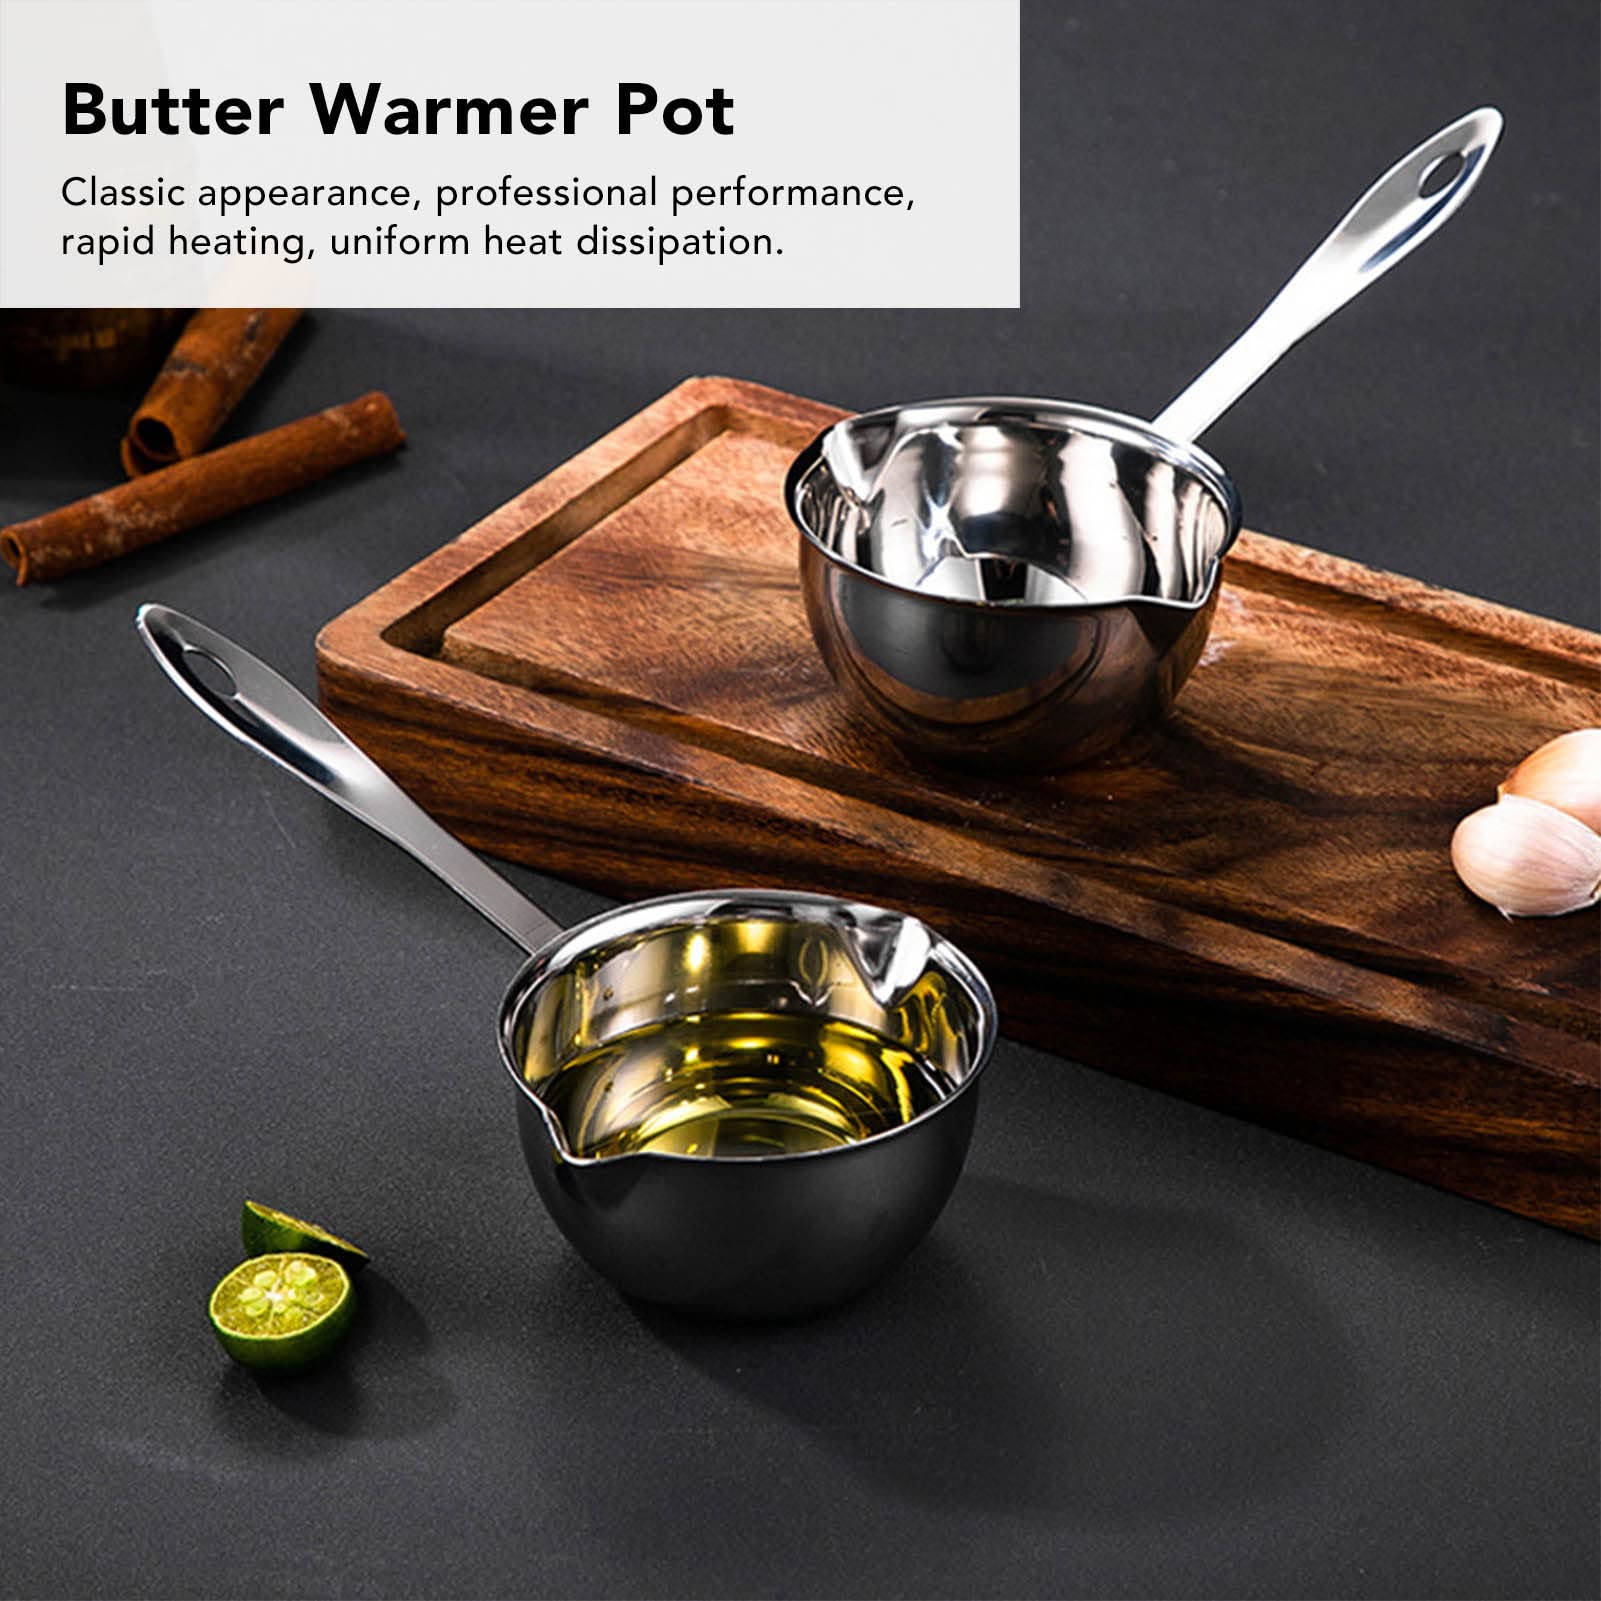 Stainless Steel Butter Warmer Pan, Mini Butter Melting Pot with Dual Pour Spout Butter Coffee Milk Warmer Flat Induction Bottom Sauce Pan for Stove Top, Soup, Chocolate, Tea Warming(150ML)